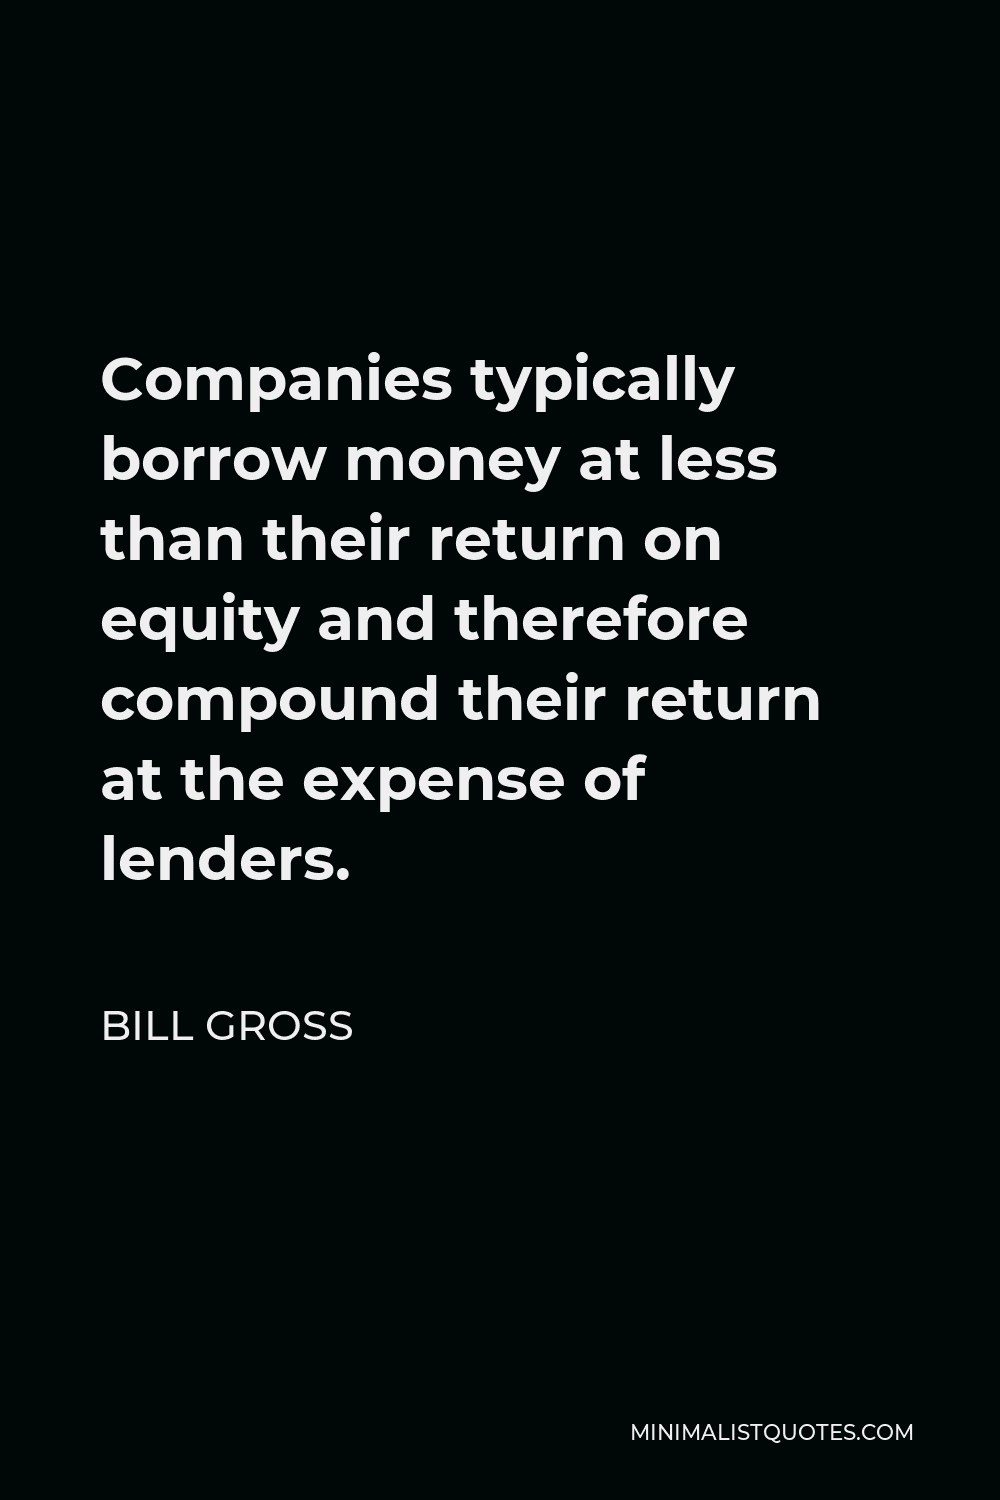 Bill Gross Quote - Companies typically borrow money at less than their return on equity and therefore compound their return at the expense of lenders.